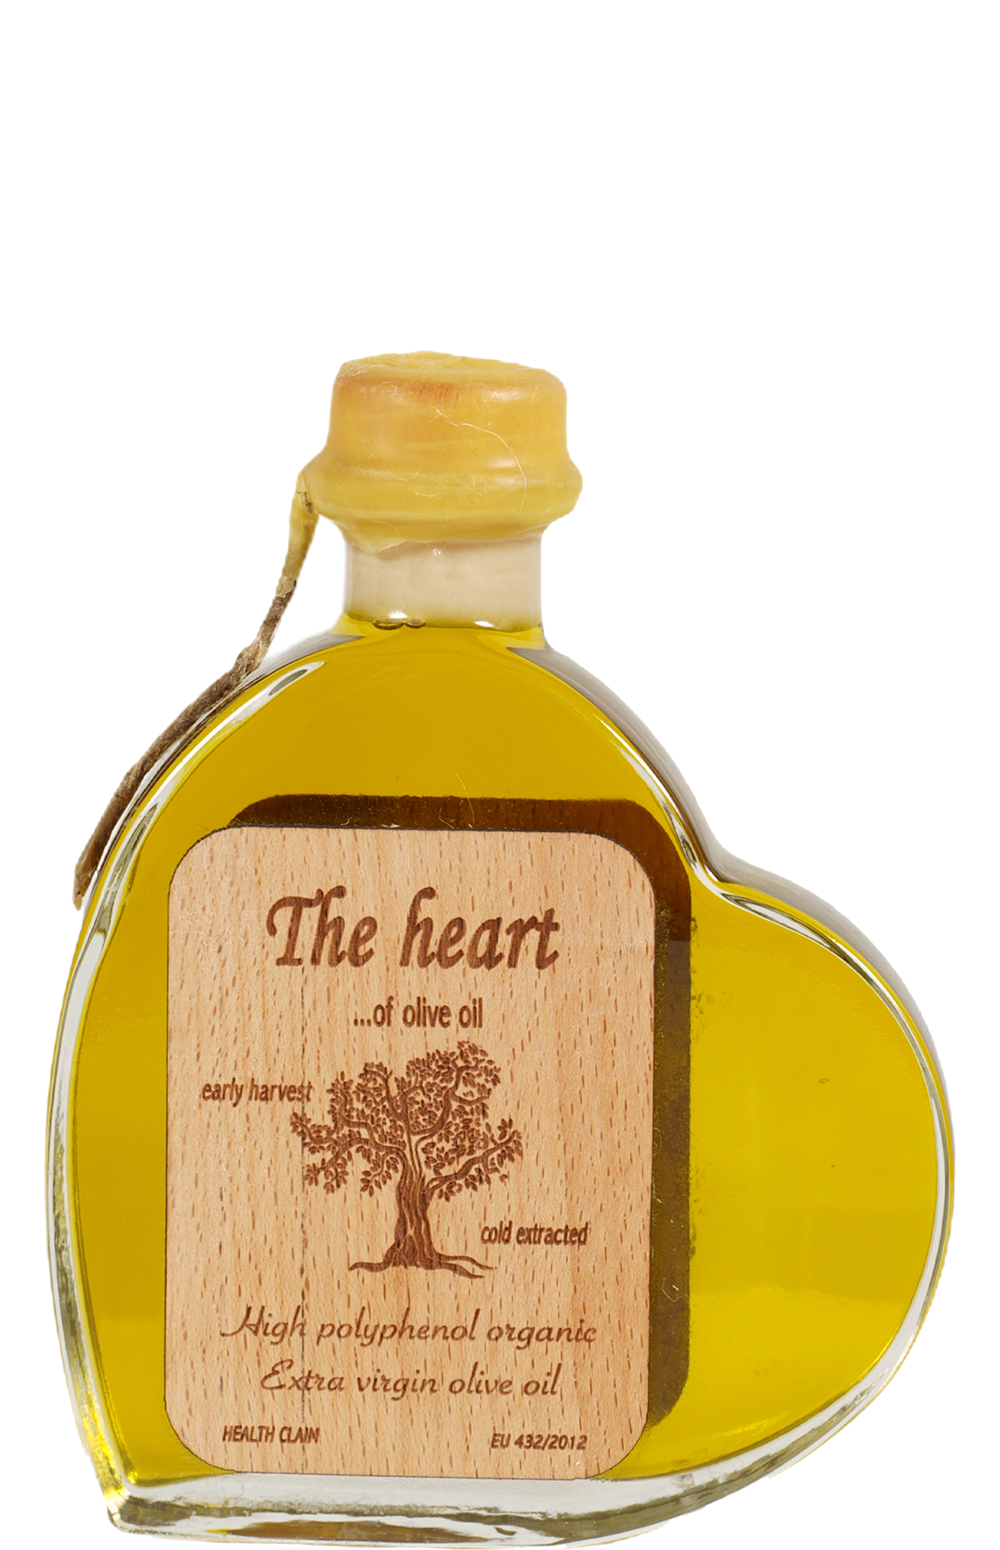 The heart of Olive oil